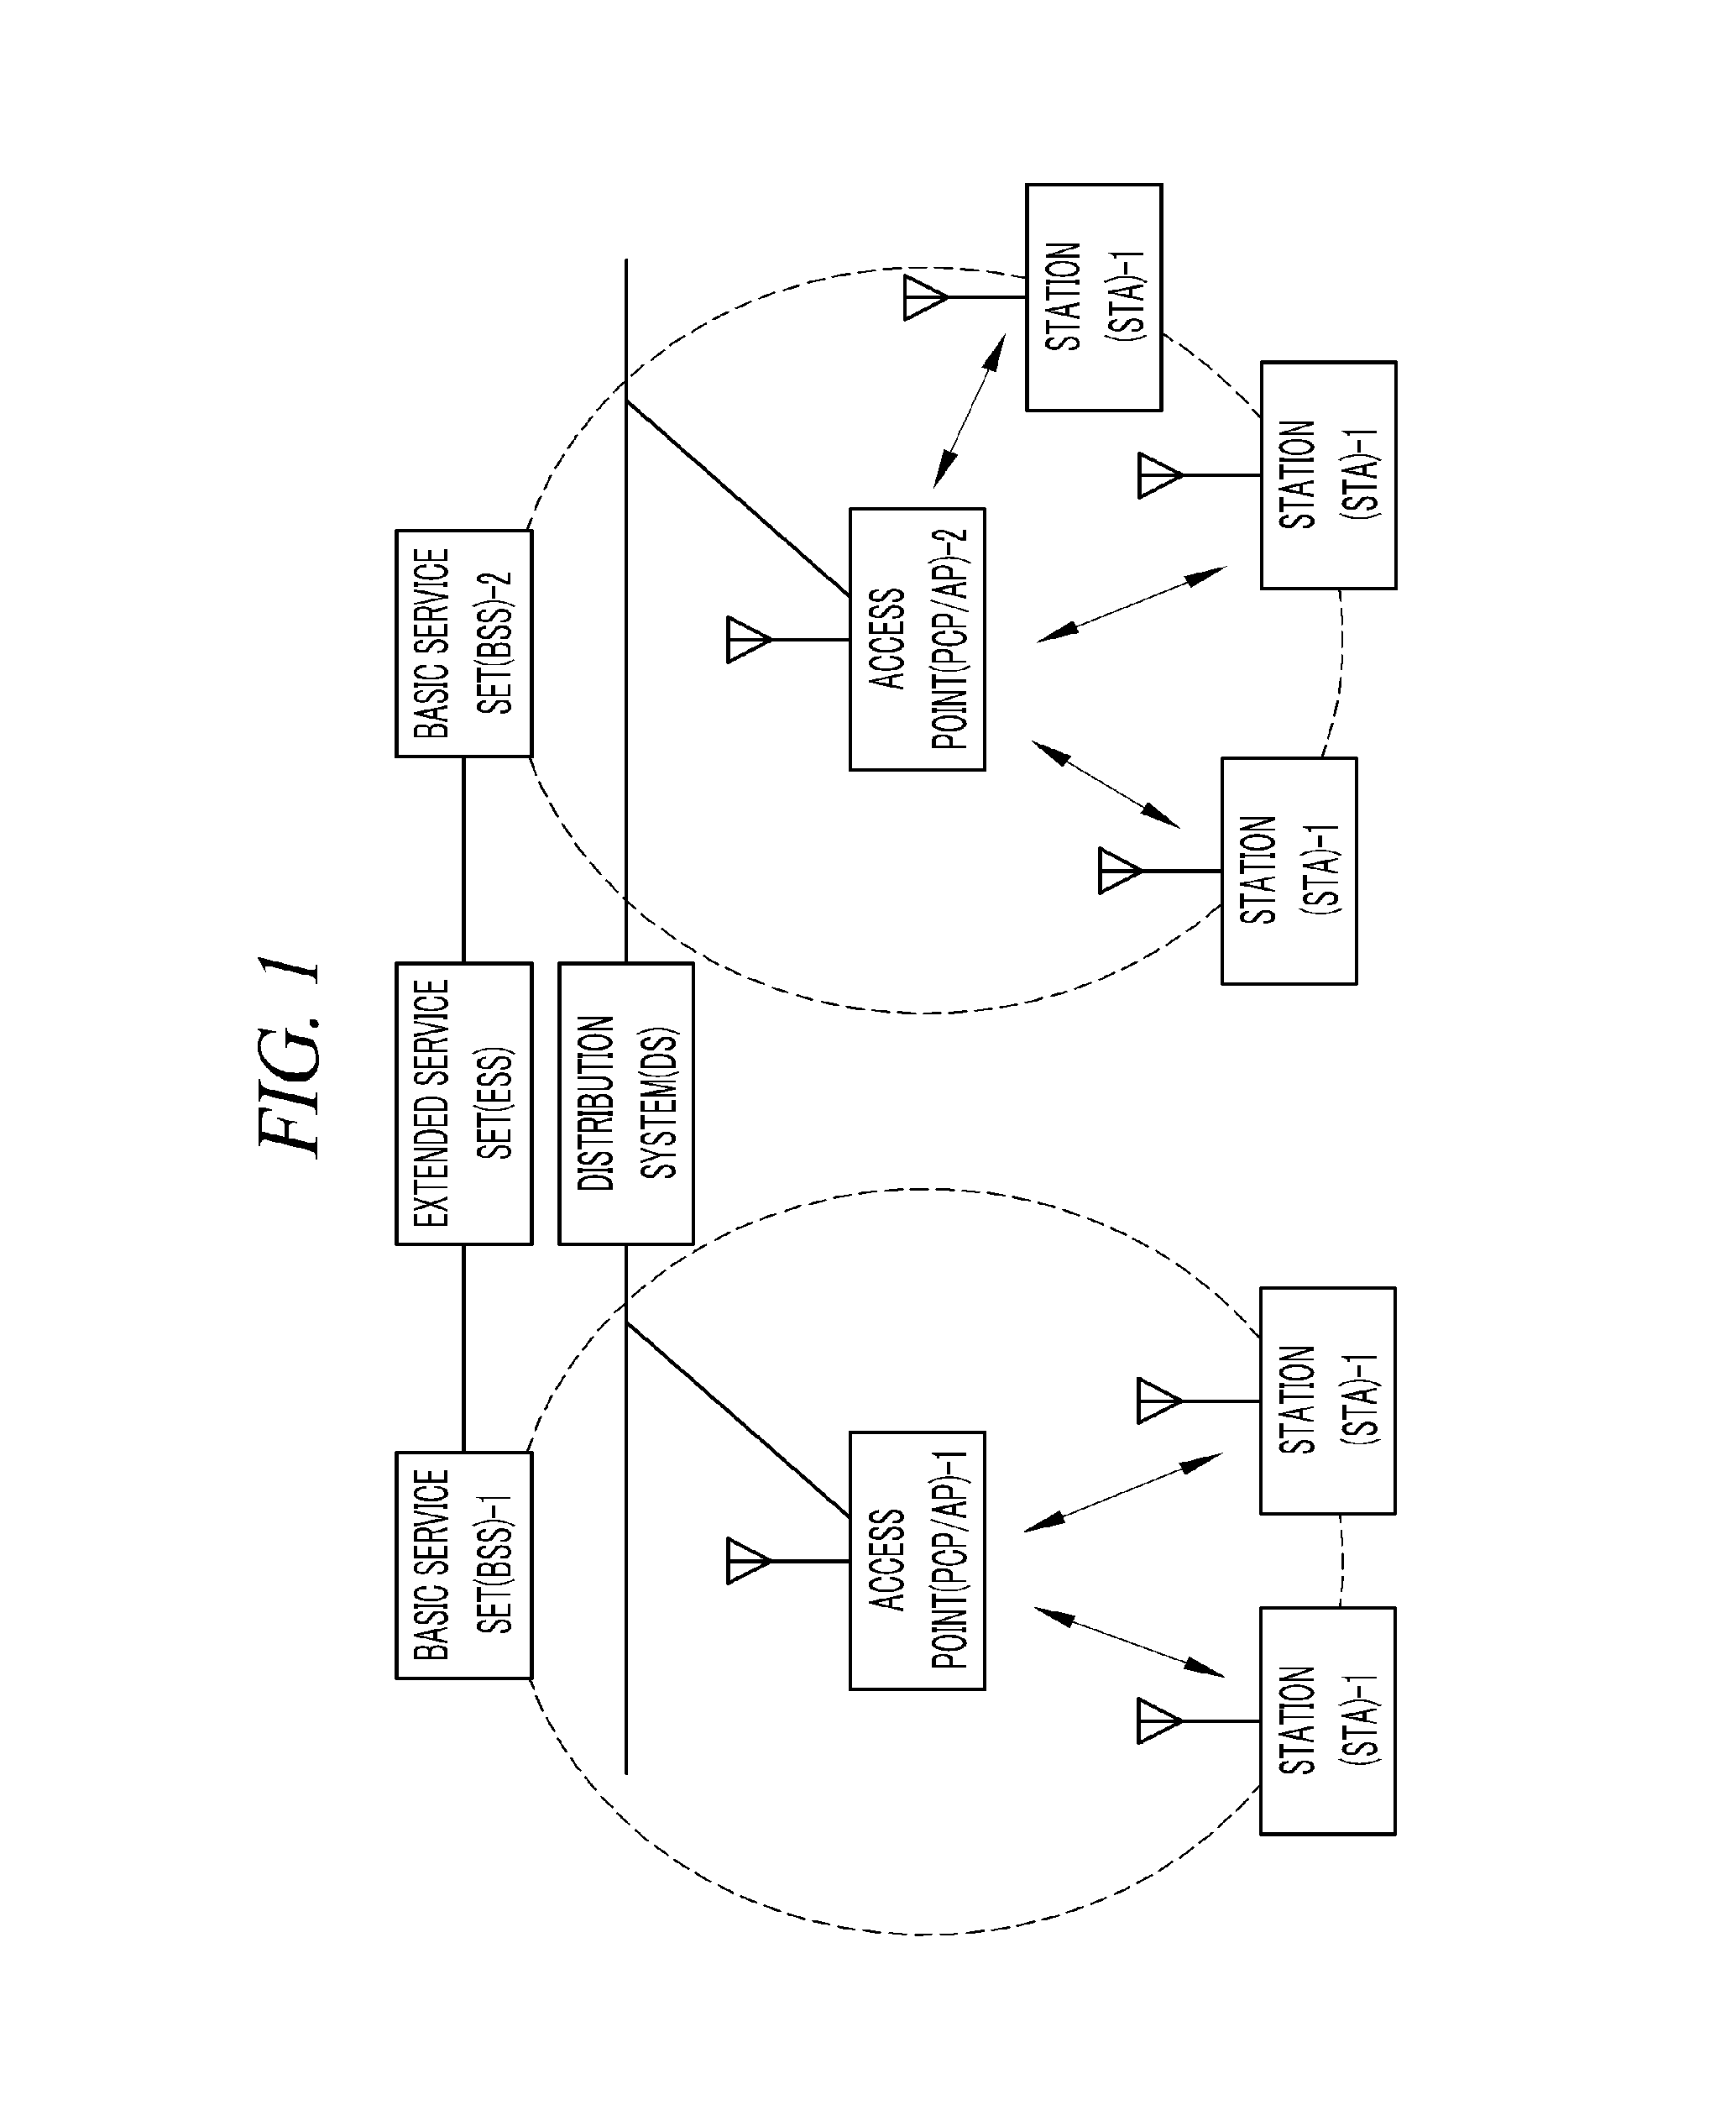 Station and wireless link configuration method therefor